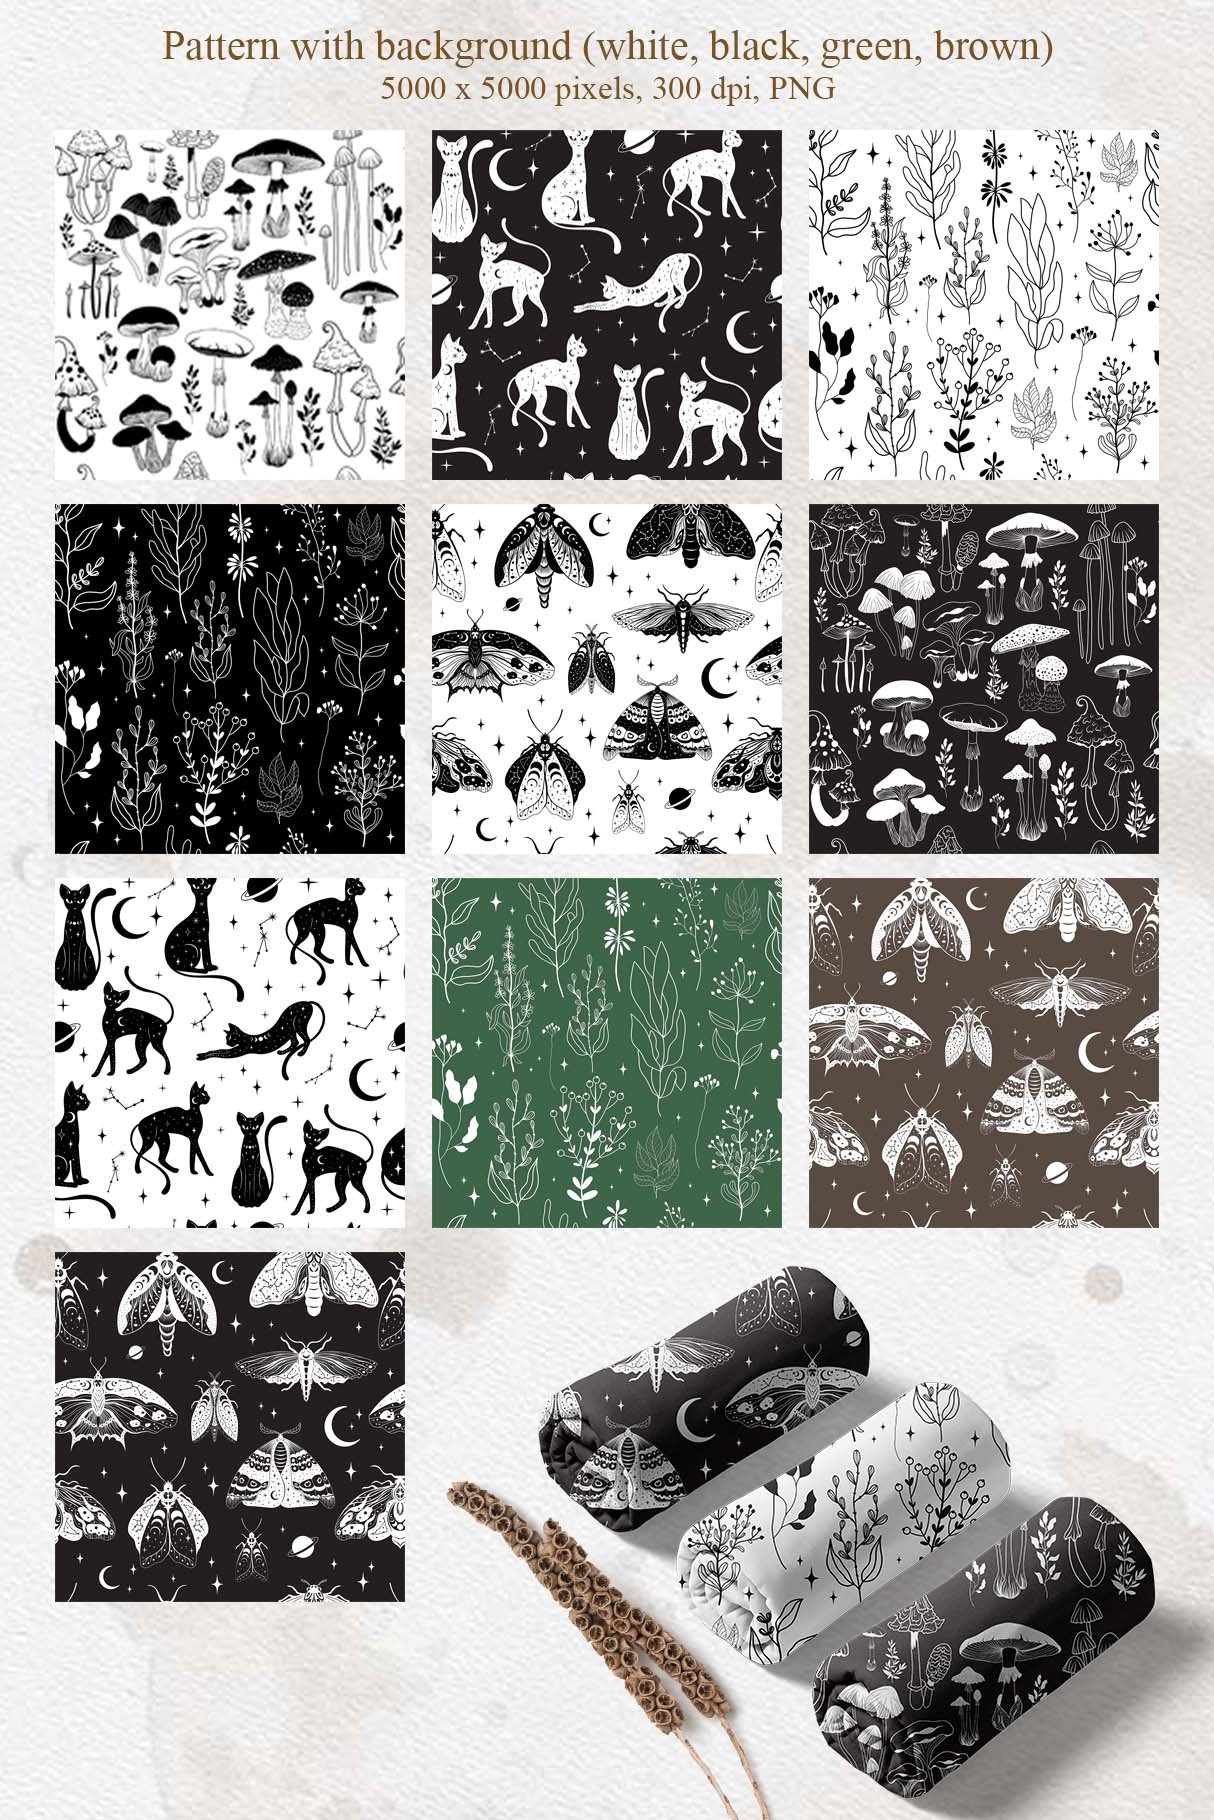 Patterns with the mystical and magic animals.